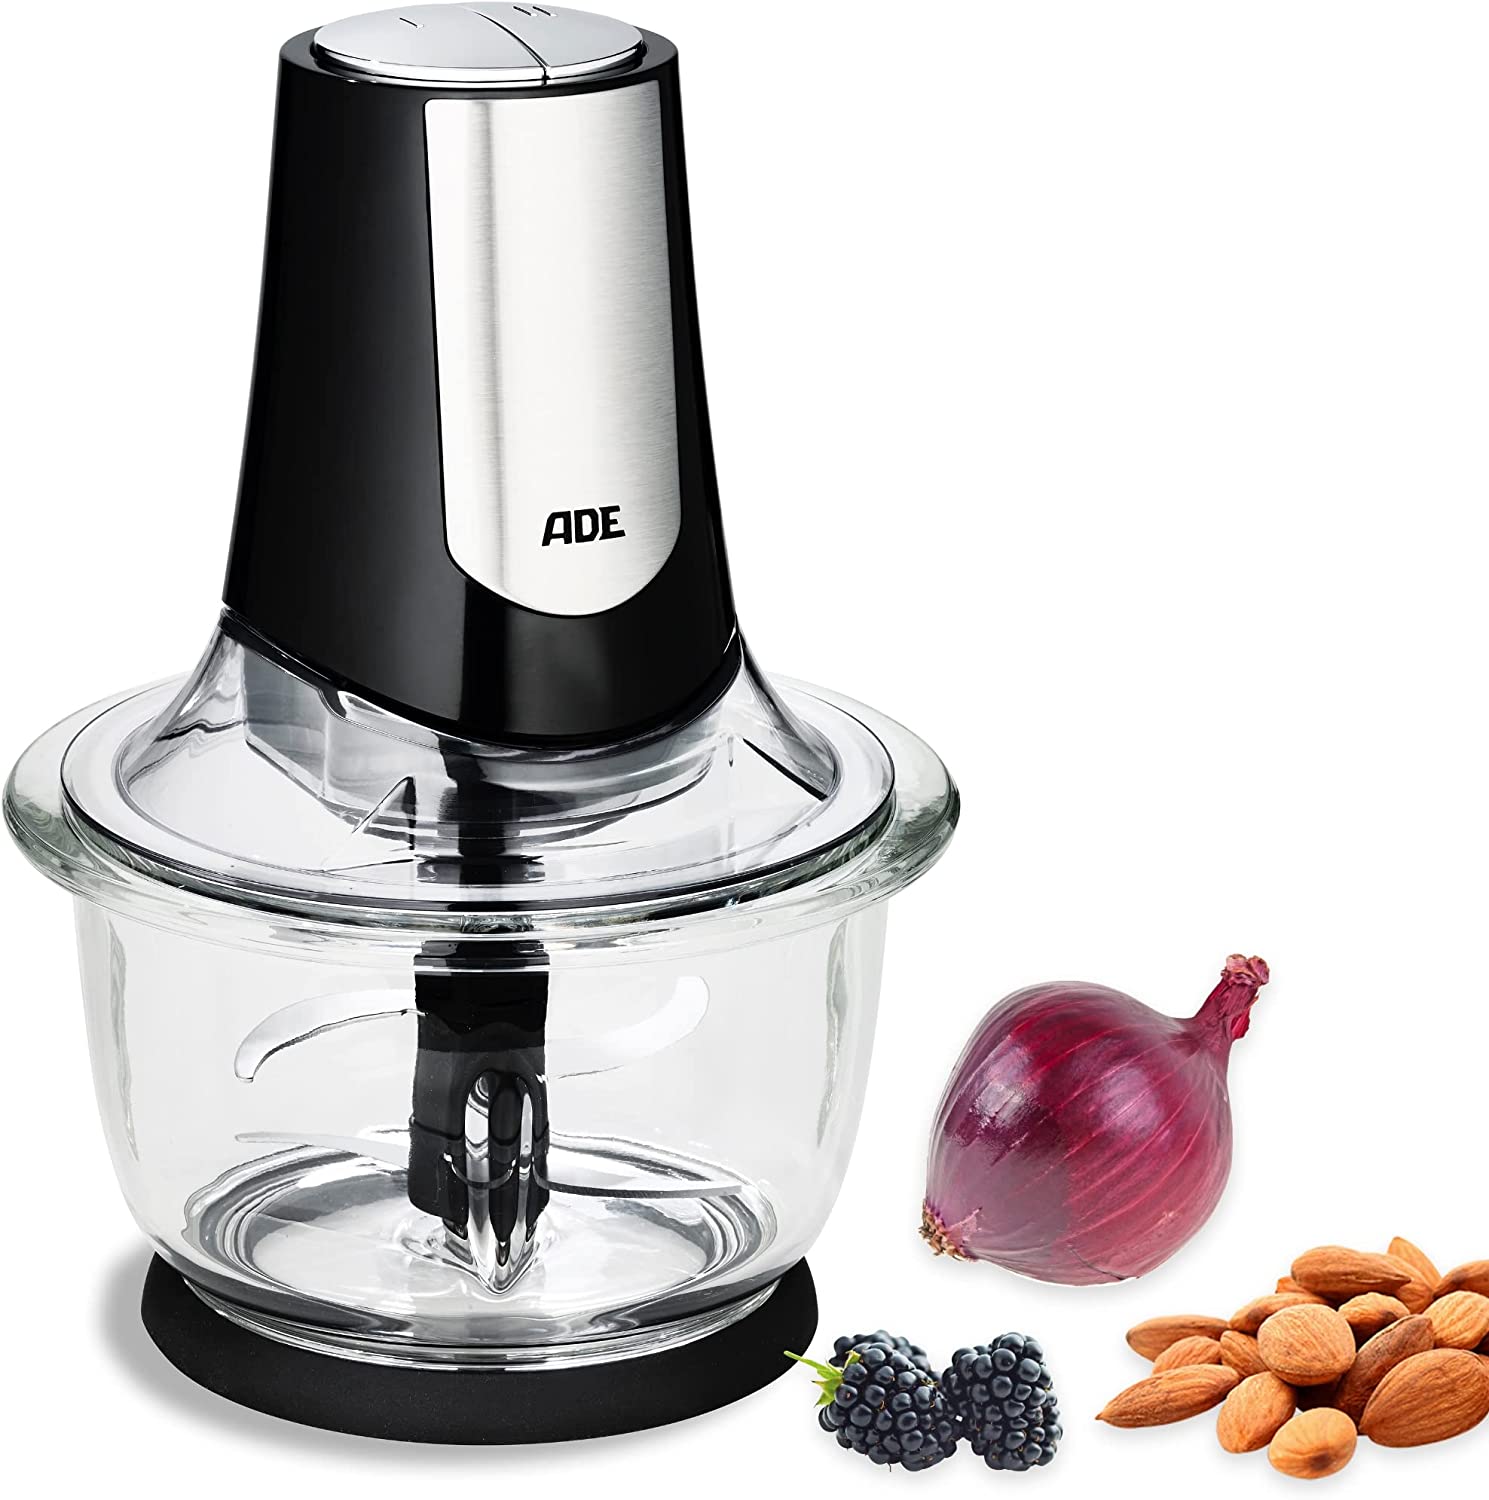 Ade Powerful Electric Chopper | Powerful 500W Motor | Large 1.2l Glass Bowl | 4 Stainless Steel Blades | 2 Speeds | Onions, Vegetables, Meat | Universal and Multi Chopper